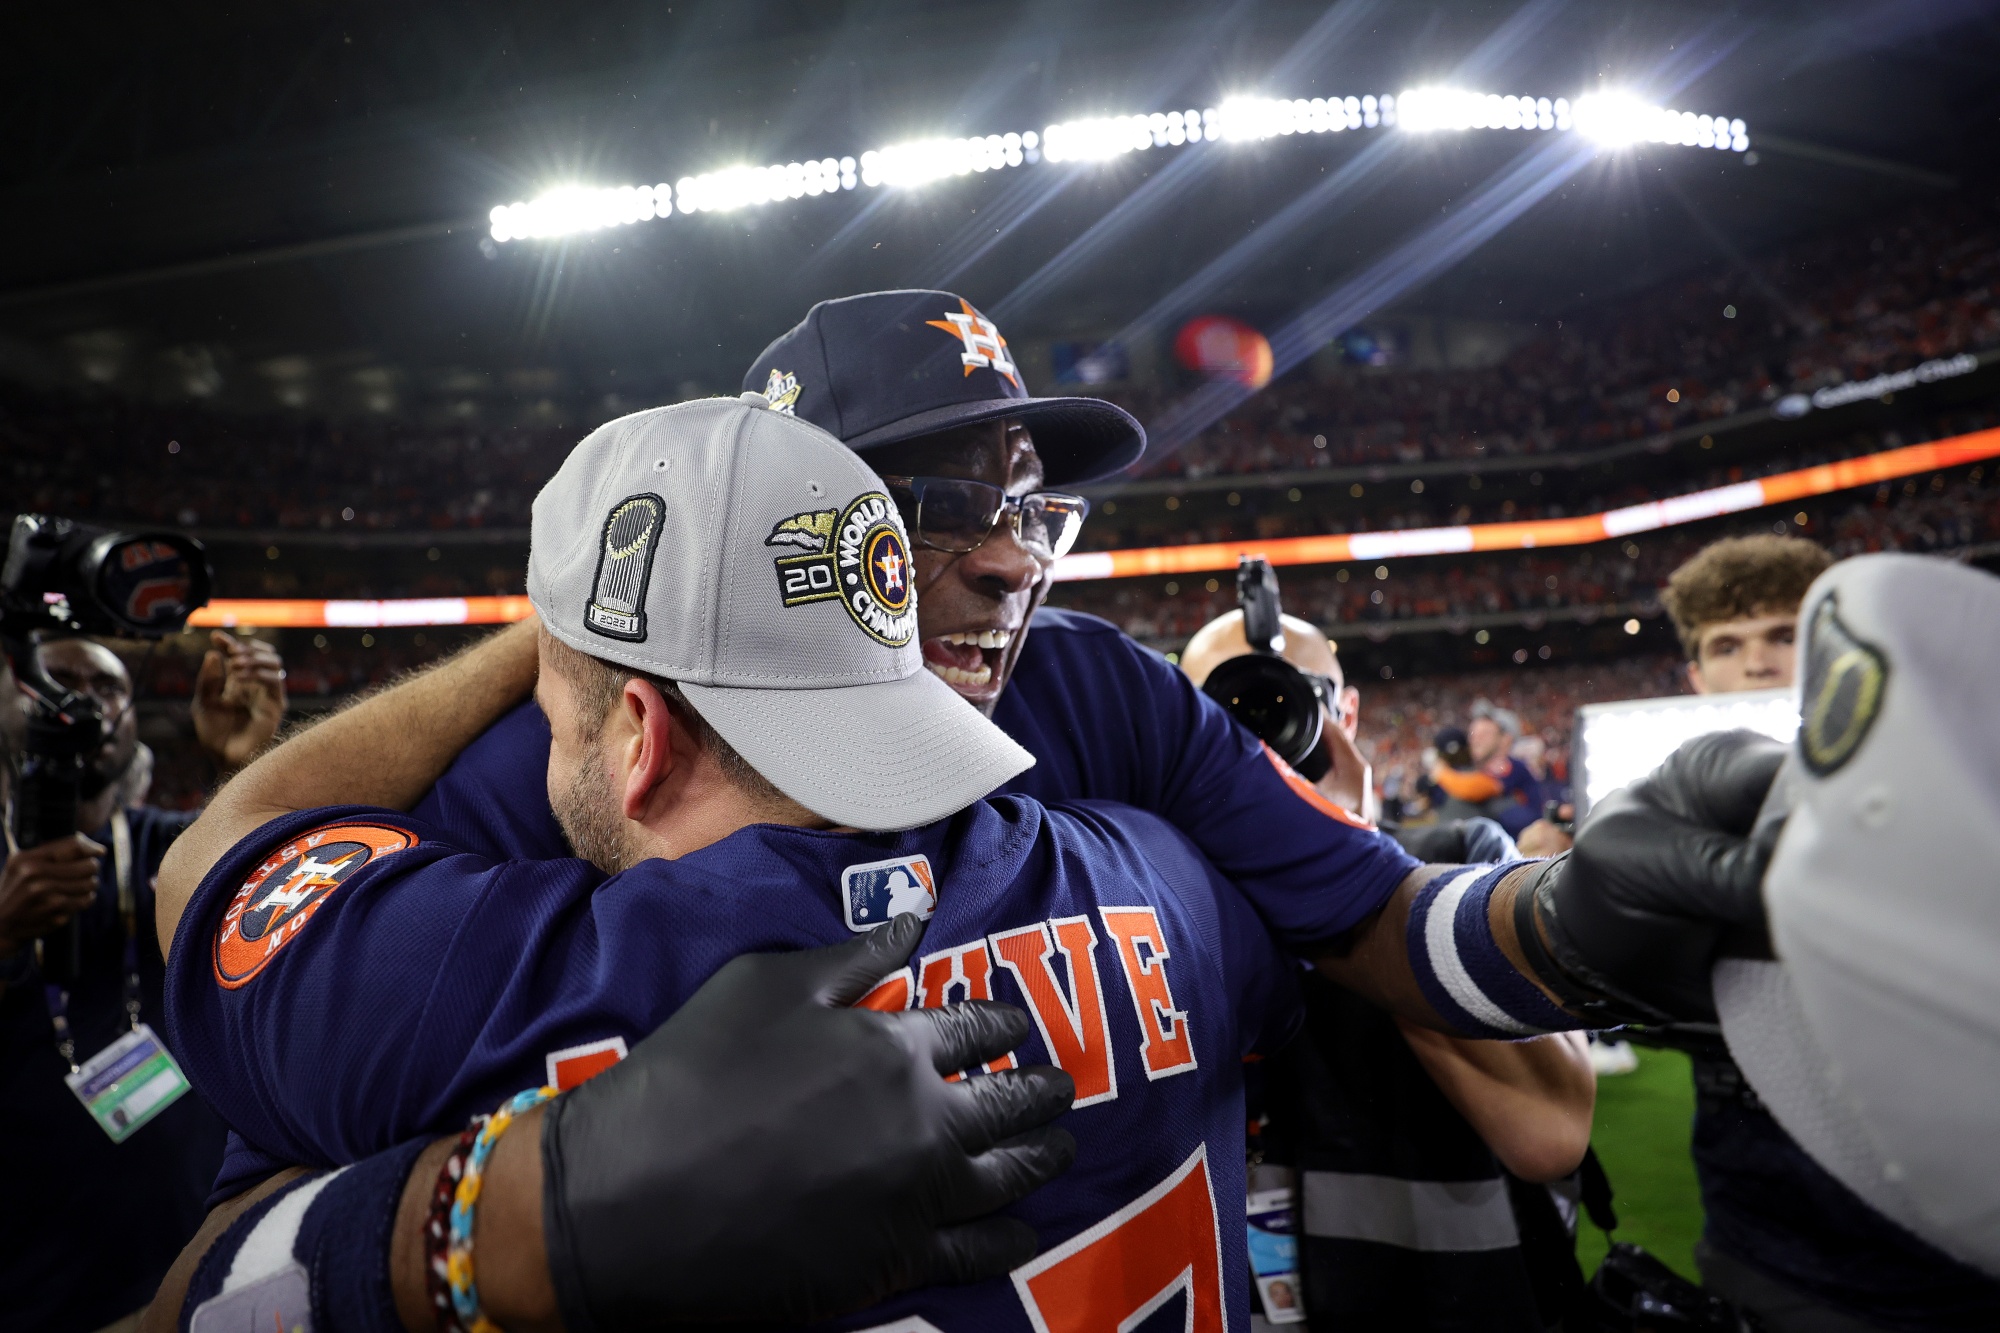 Baker Finally Wins 1st Series Title as Manager With Astros - Bloomberg